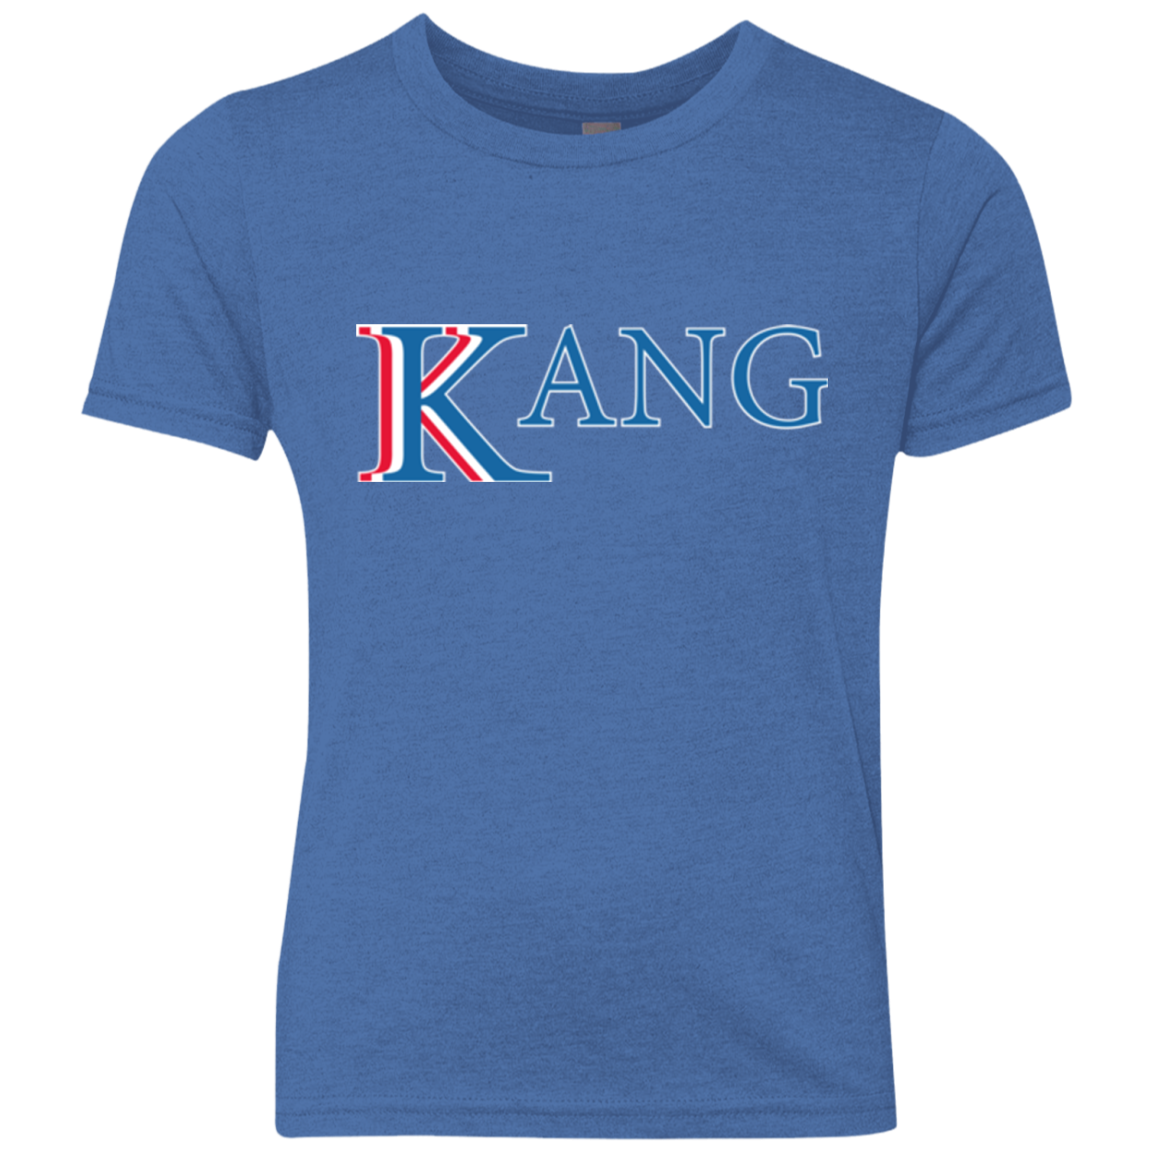 Vote for Kang Youth Triblend T-Shirt